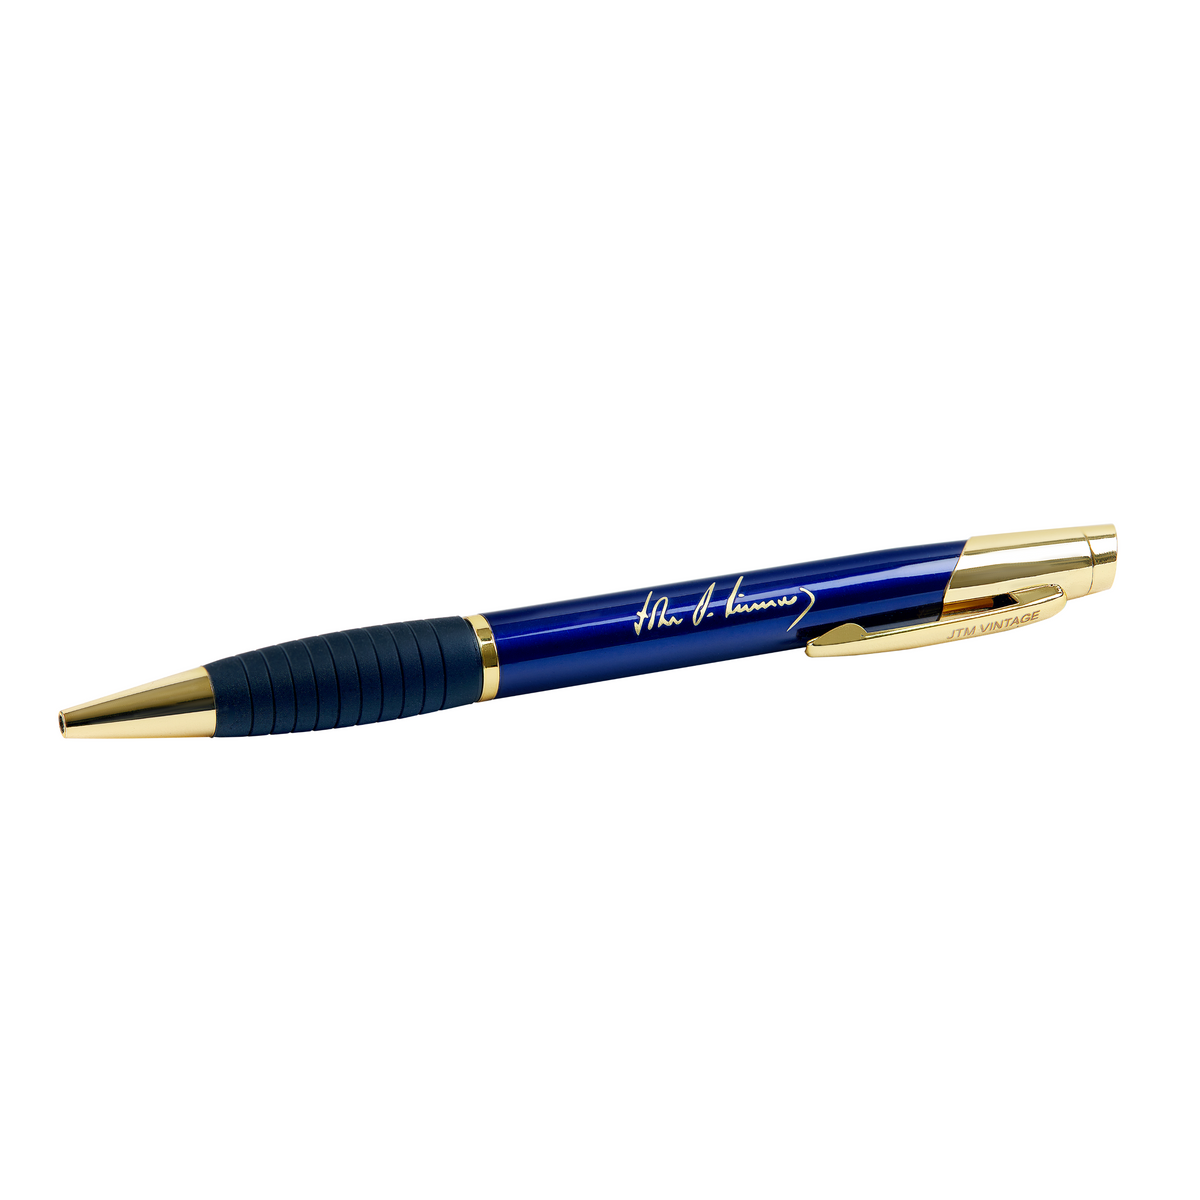 White House Presidential Eagle Seal Ballpoint Pen in Box from